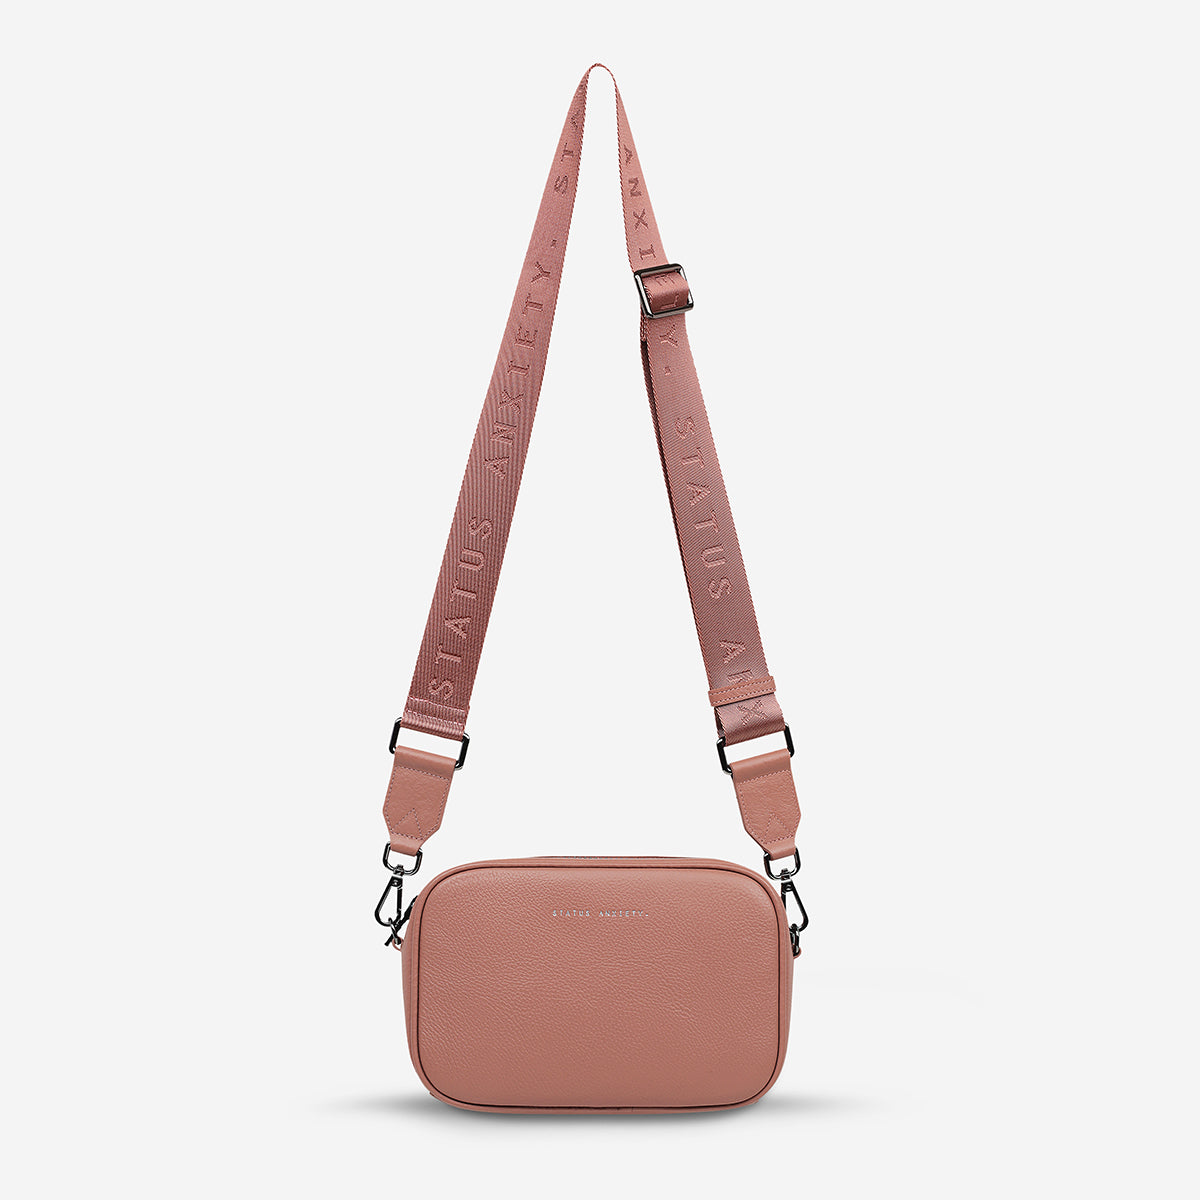 status-anxiety-bag-plunder-webbed-strap-dusty-rose-front-hanging.jpg